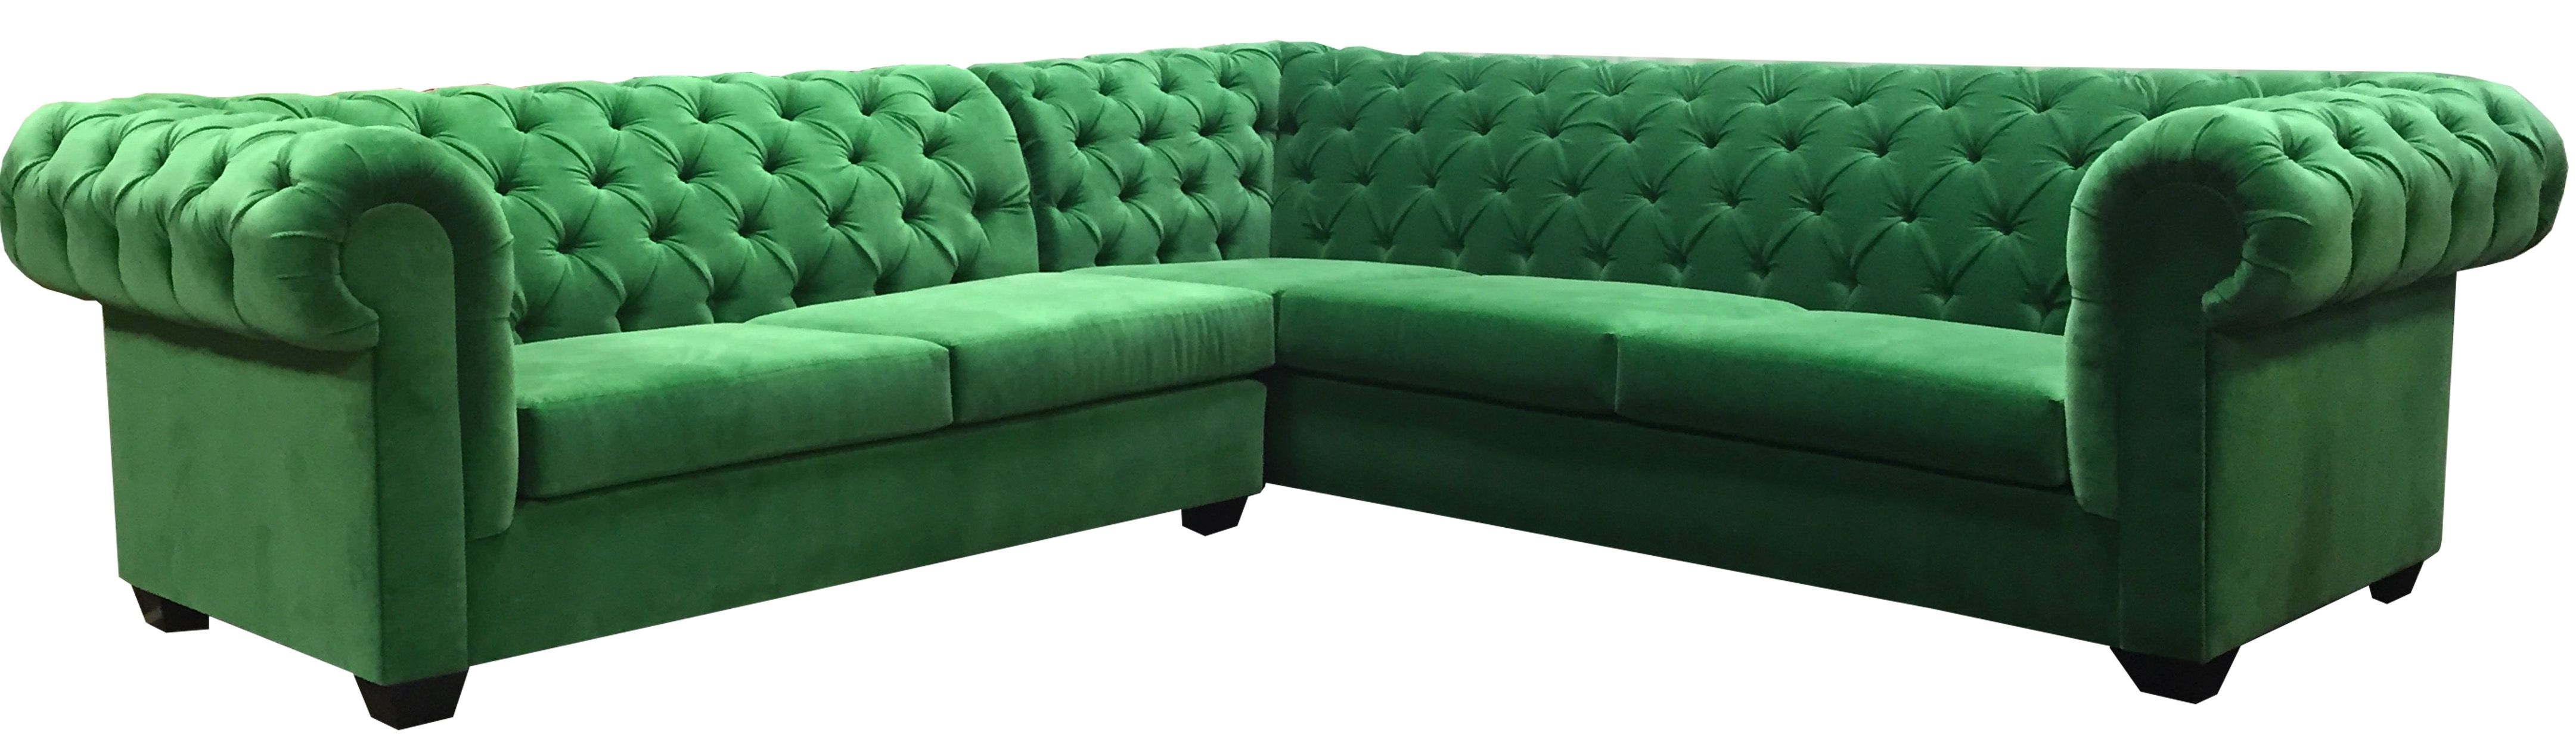 Green Sectional Sofa Mint Hunter Olive Stock Photos Hd | Paramountsmart With Green Sectional Sofas (Photo 6099 of 7825)